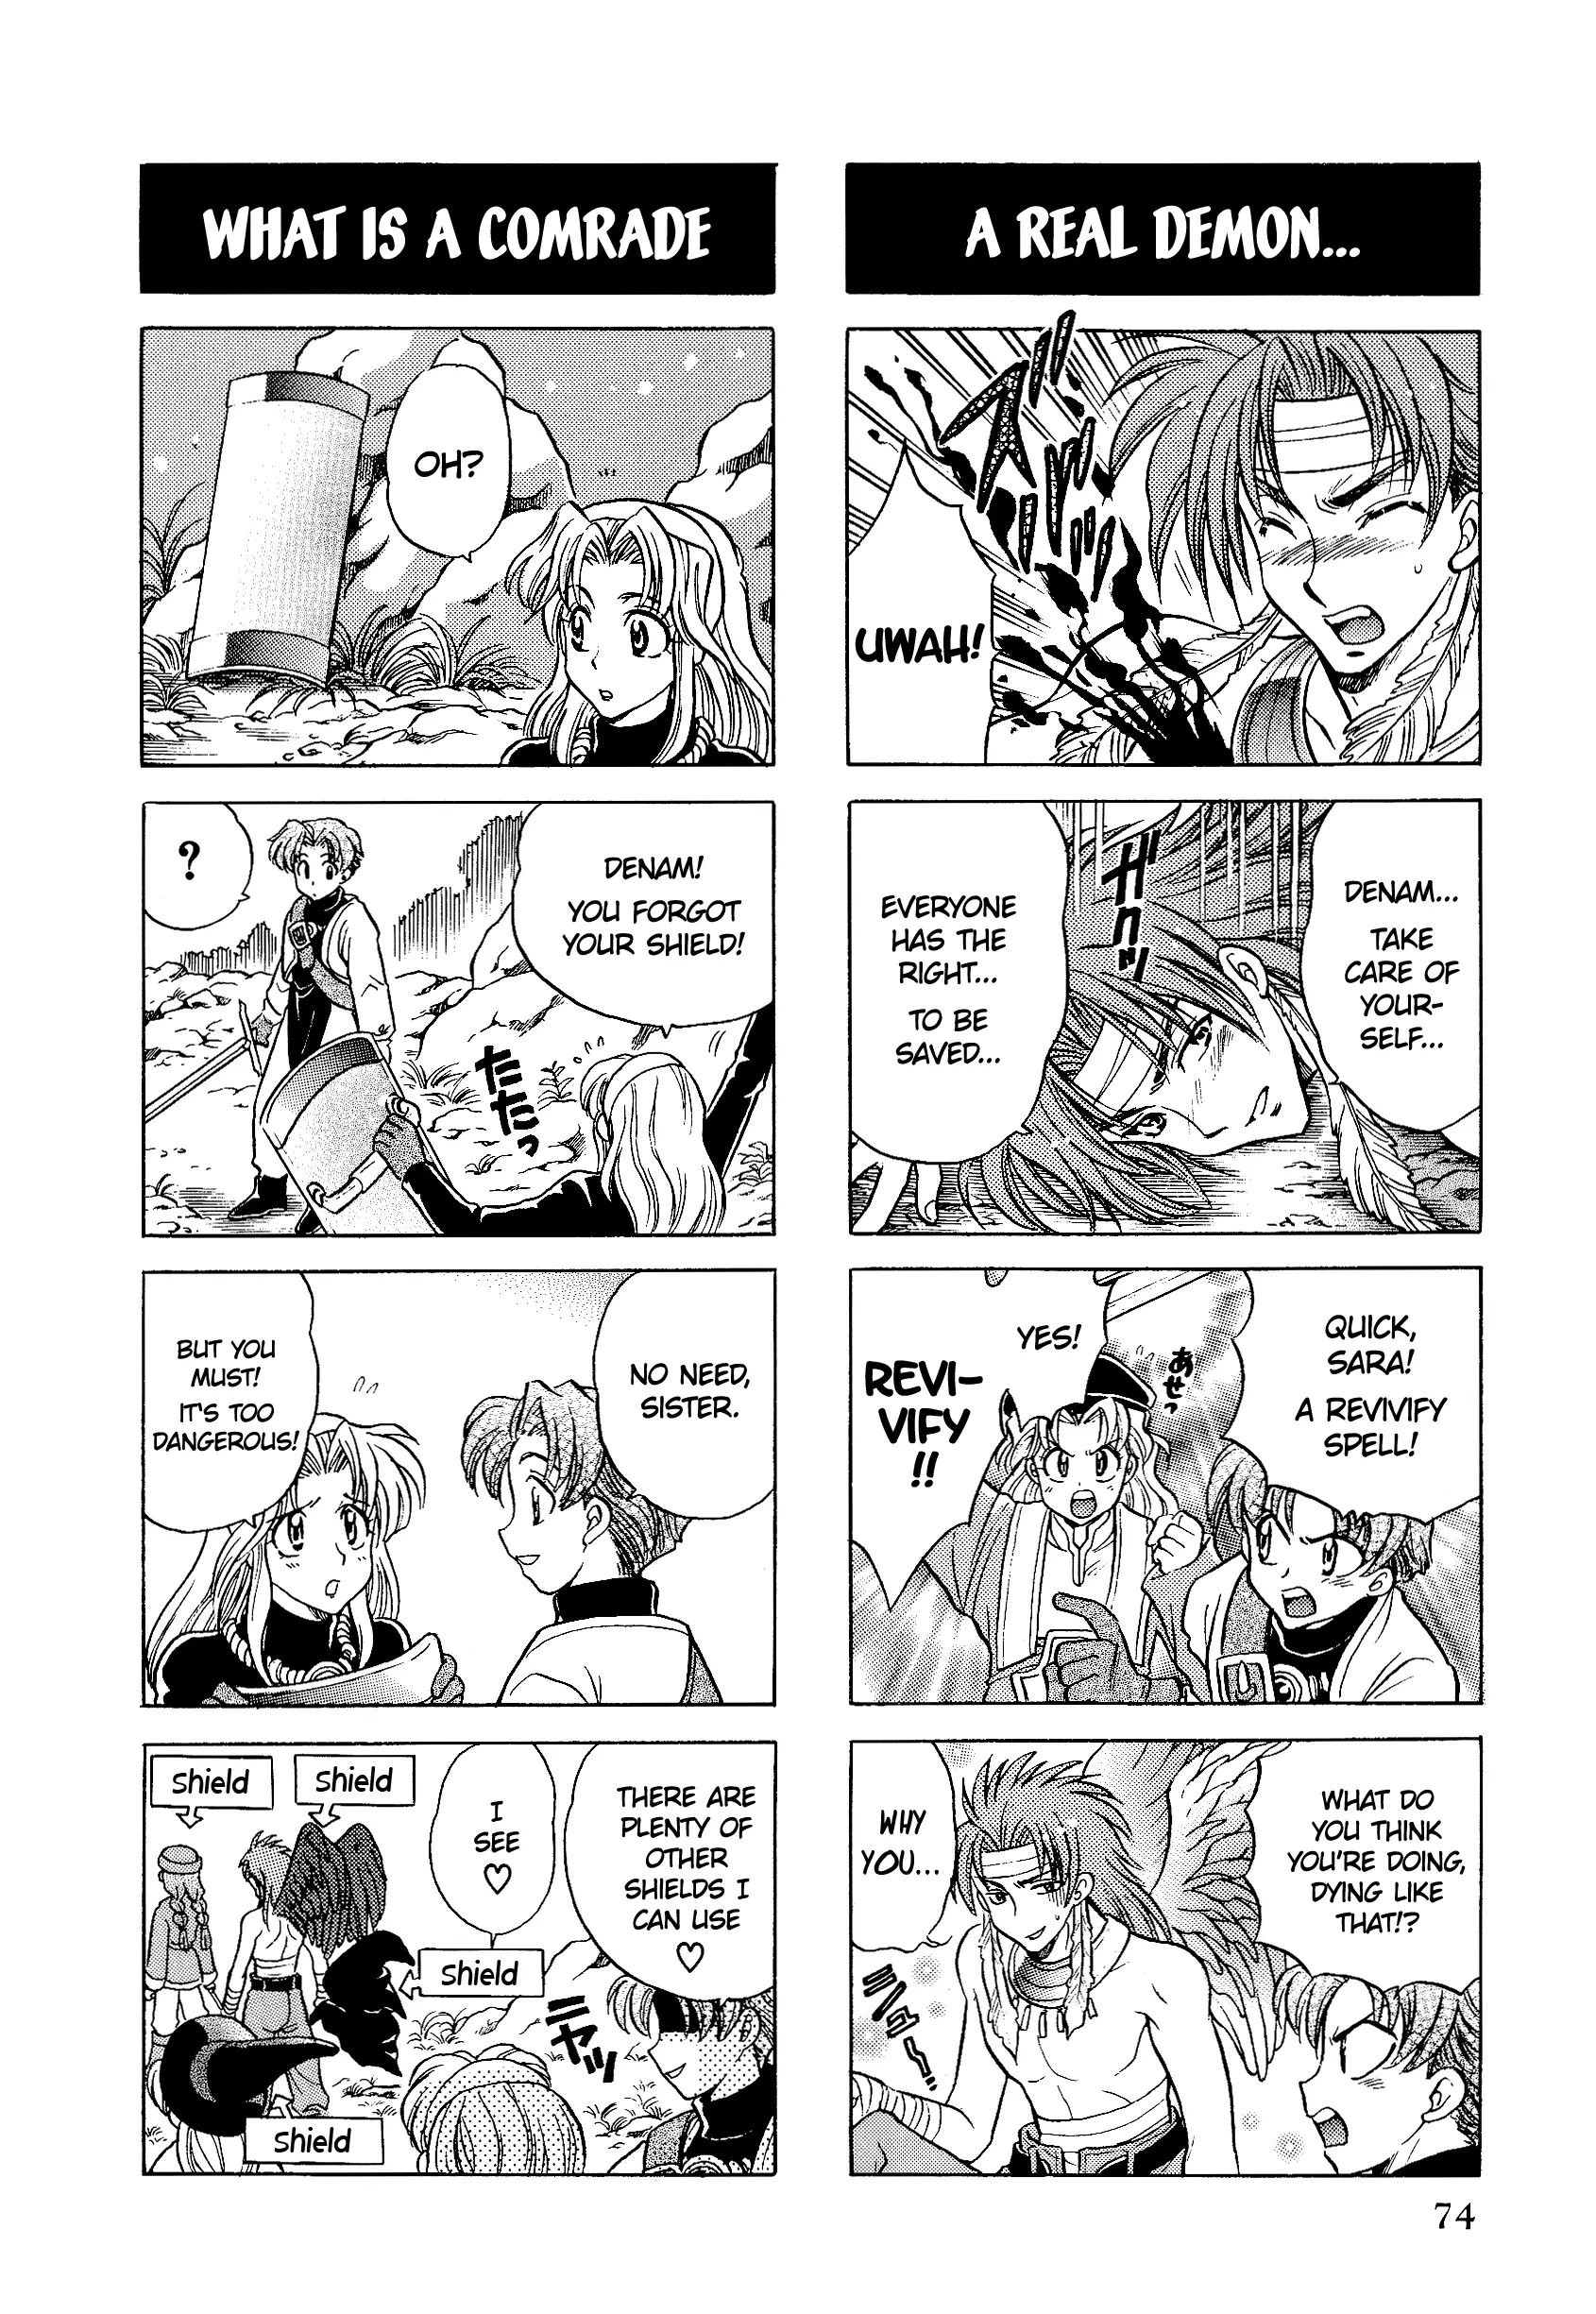 Tactics Ogre: Let Us Cling Together 4-Koma Kings - 11 page 3-15373a4b